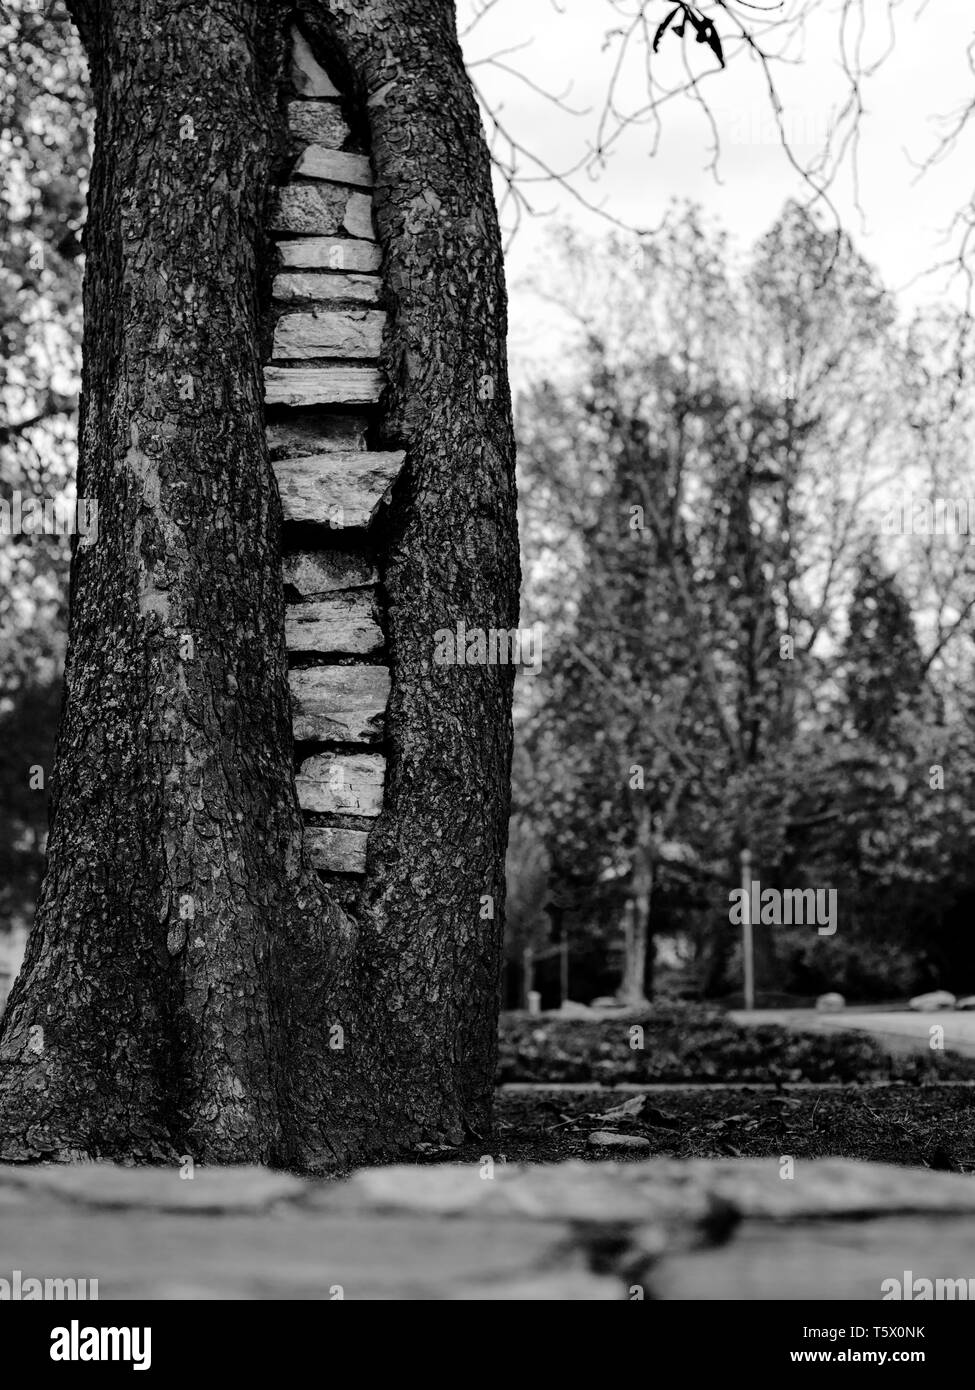 a tree in the urban park with some stone bricks in the middle of the timber trunk Stock Photo